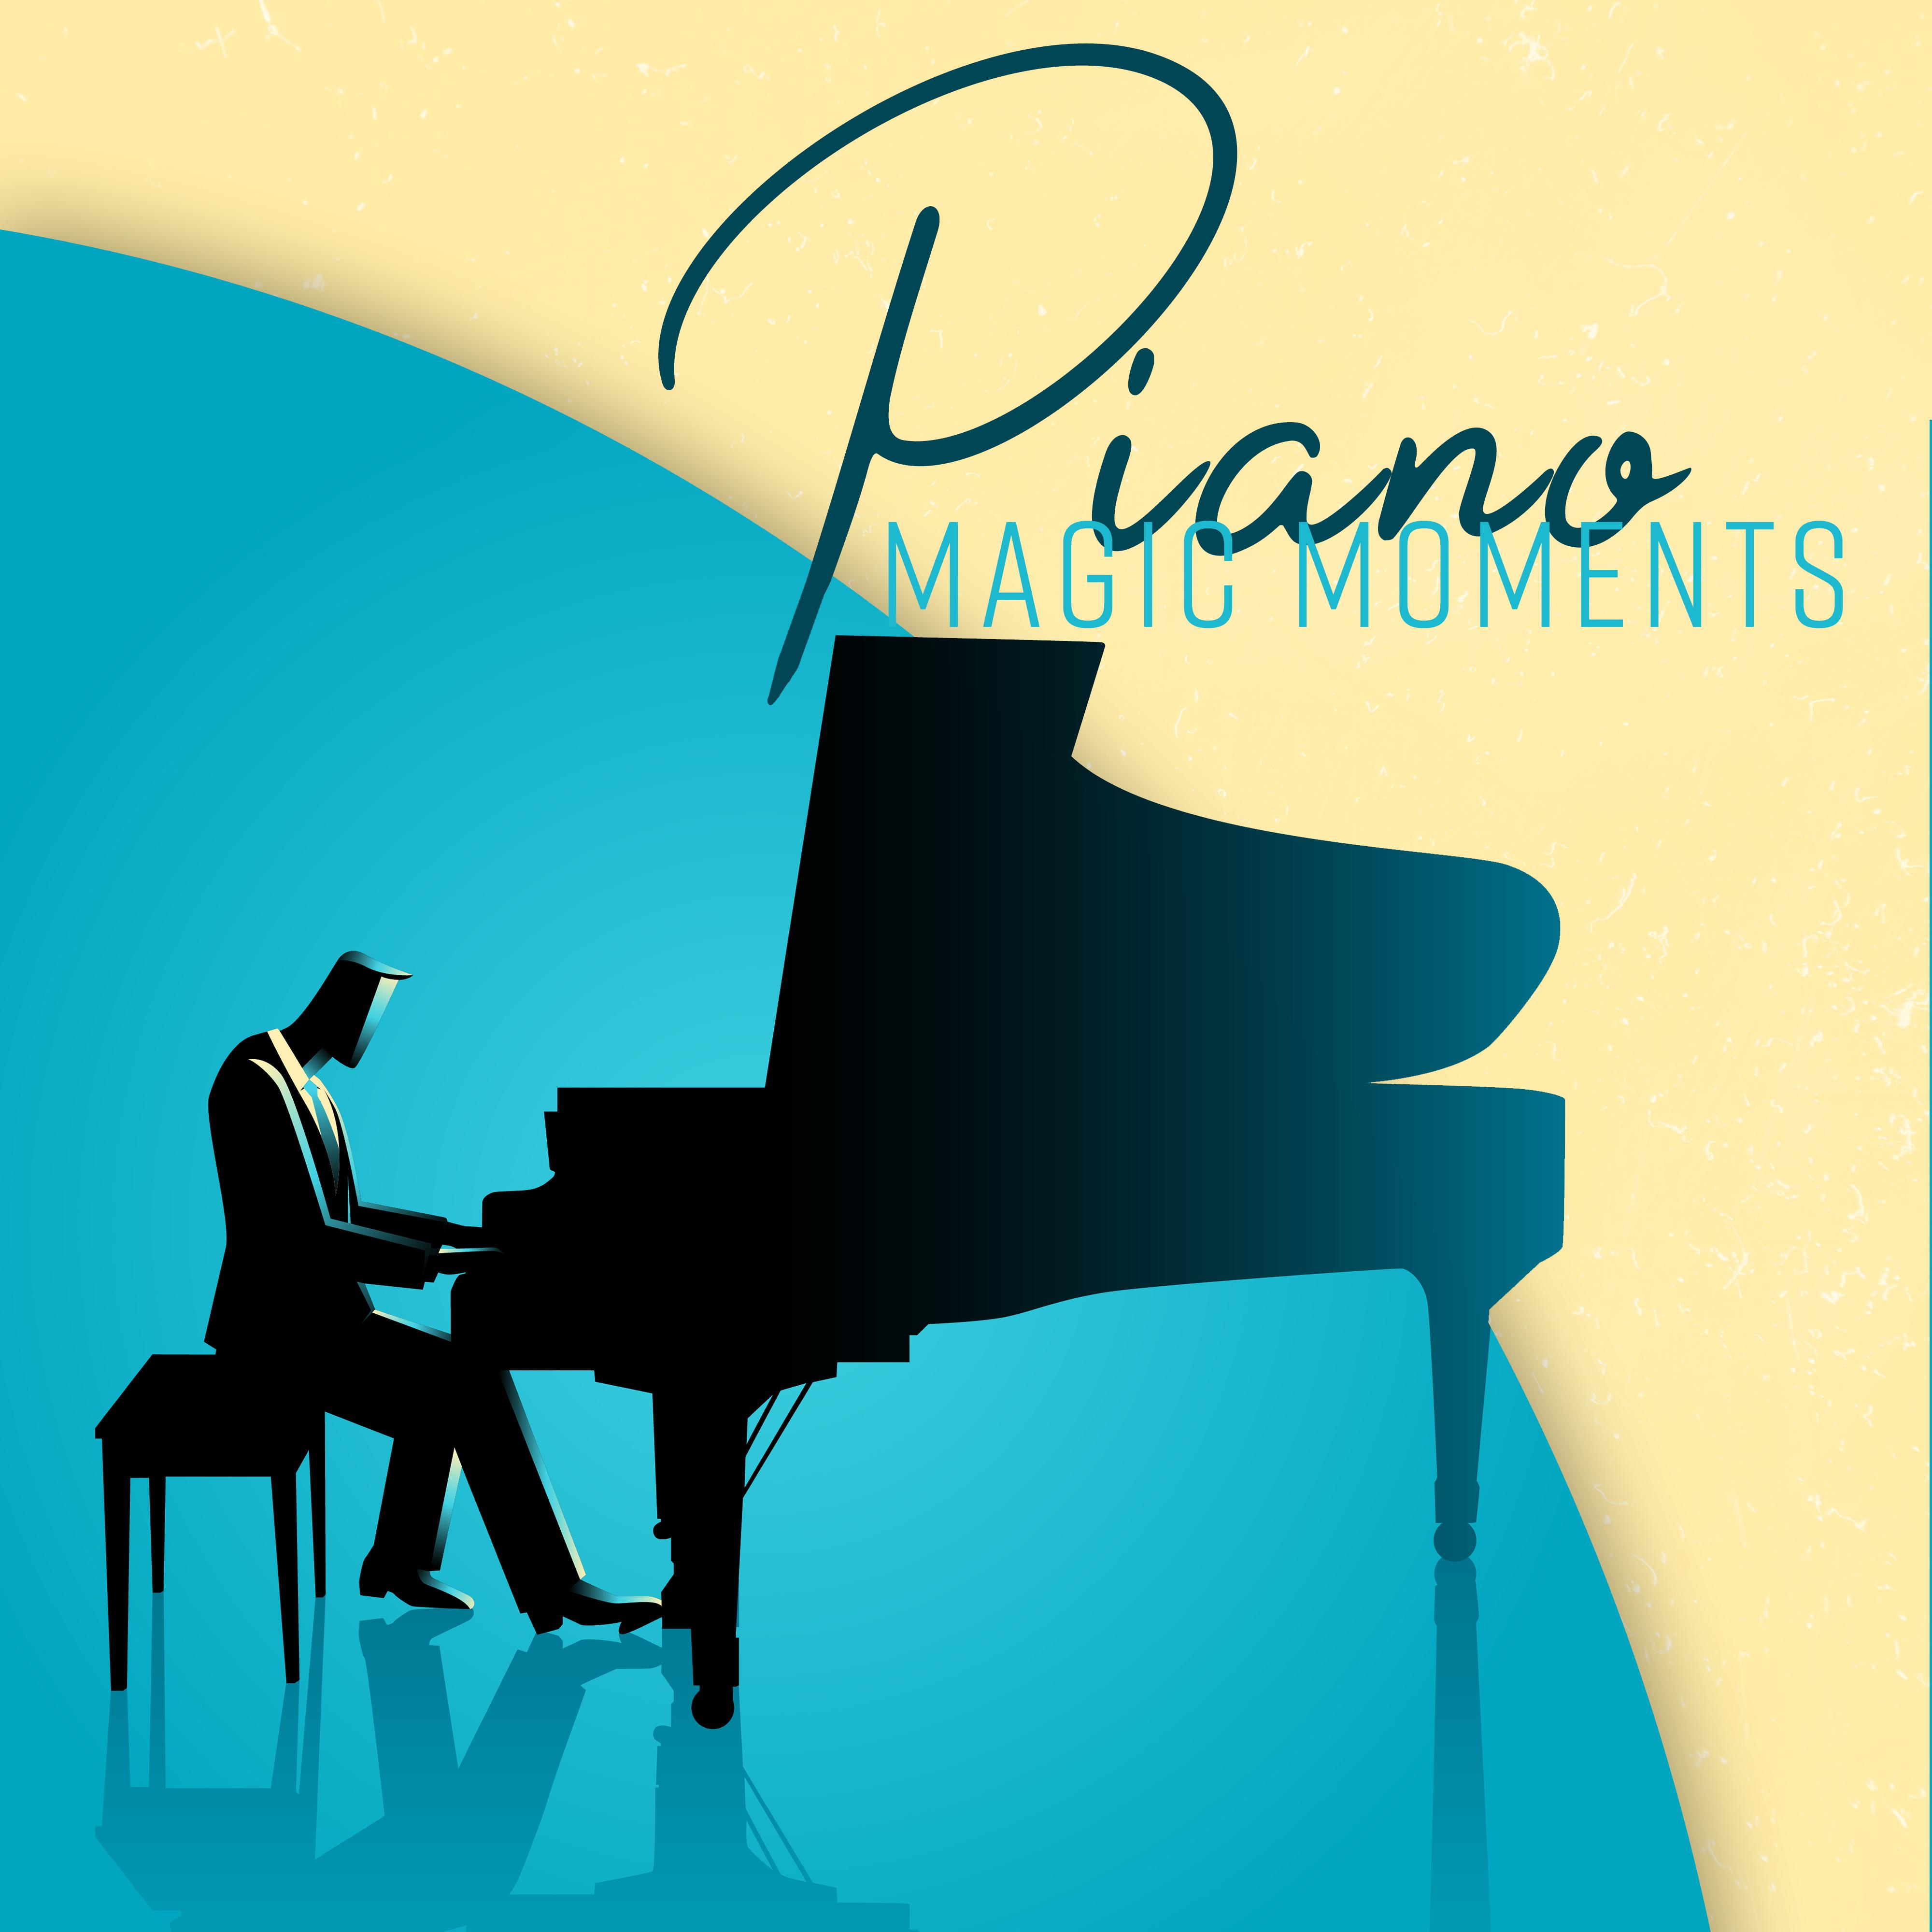 Piano Magic Moments: 15 Soft & Sensual Piano Jazz Melodies for Total Calming Down, Stress Relief, Inner Peace